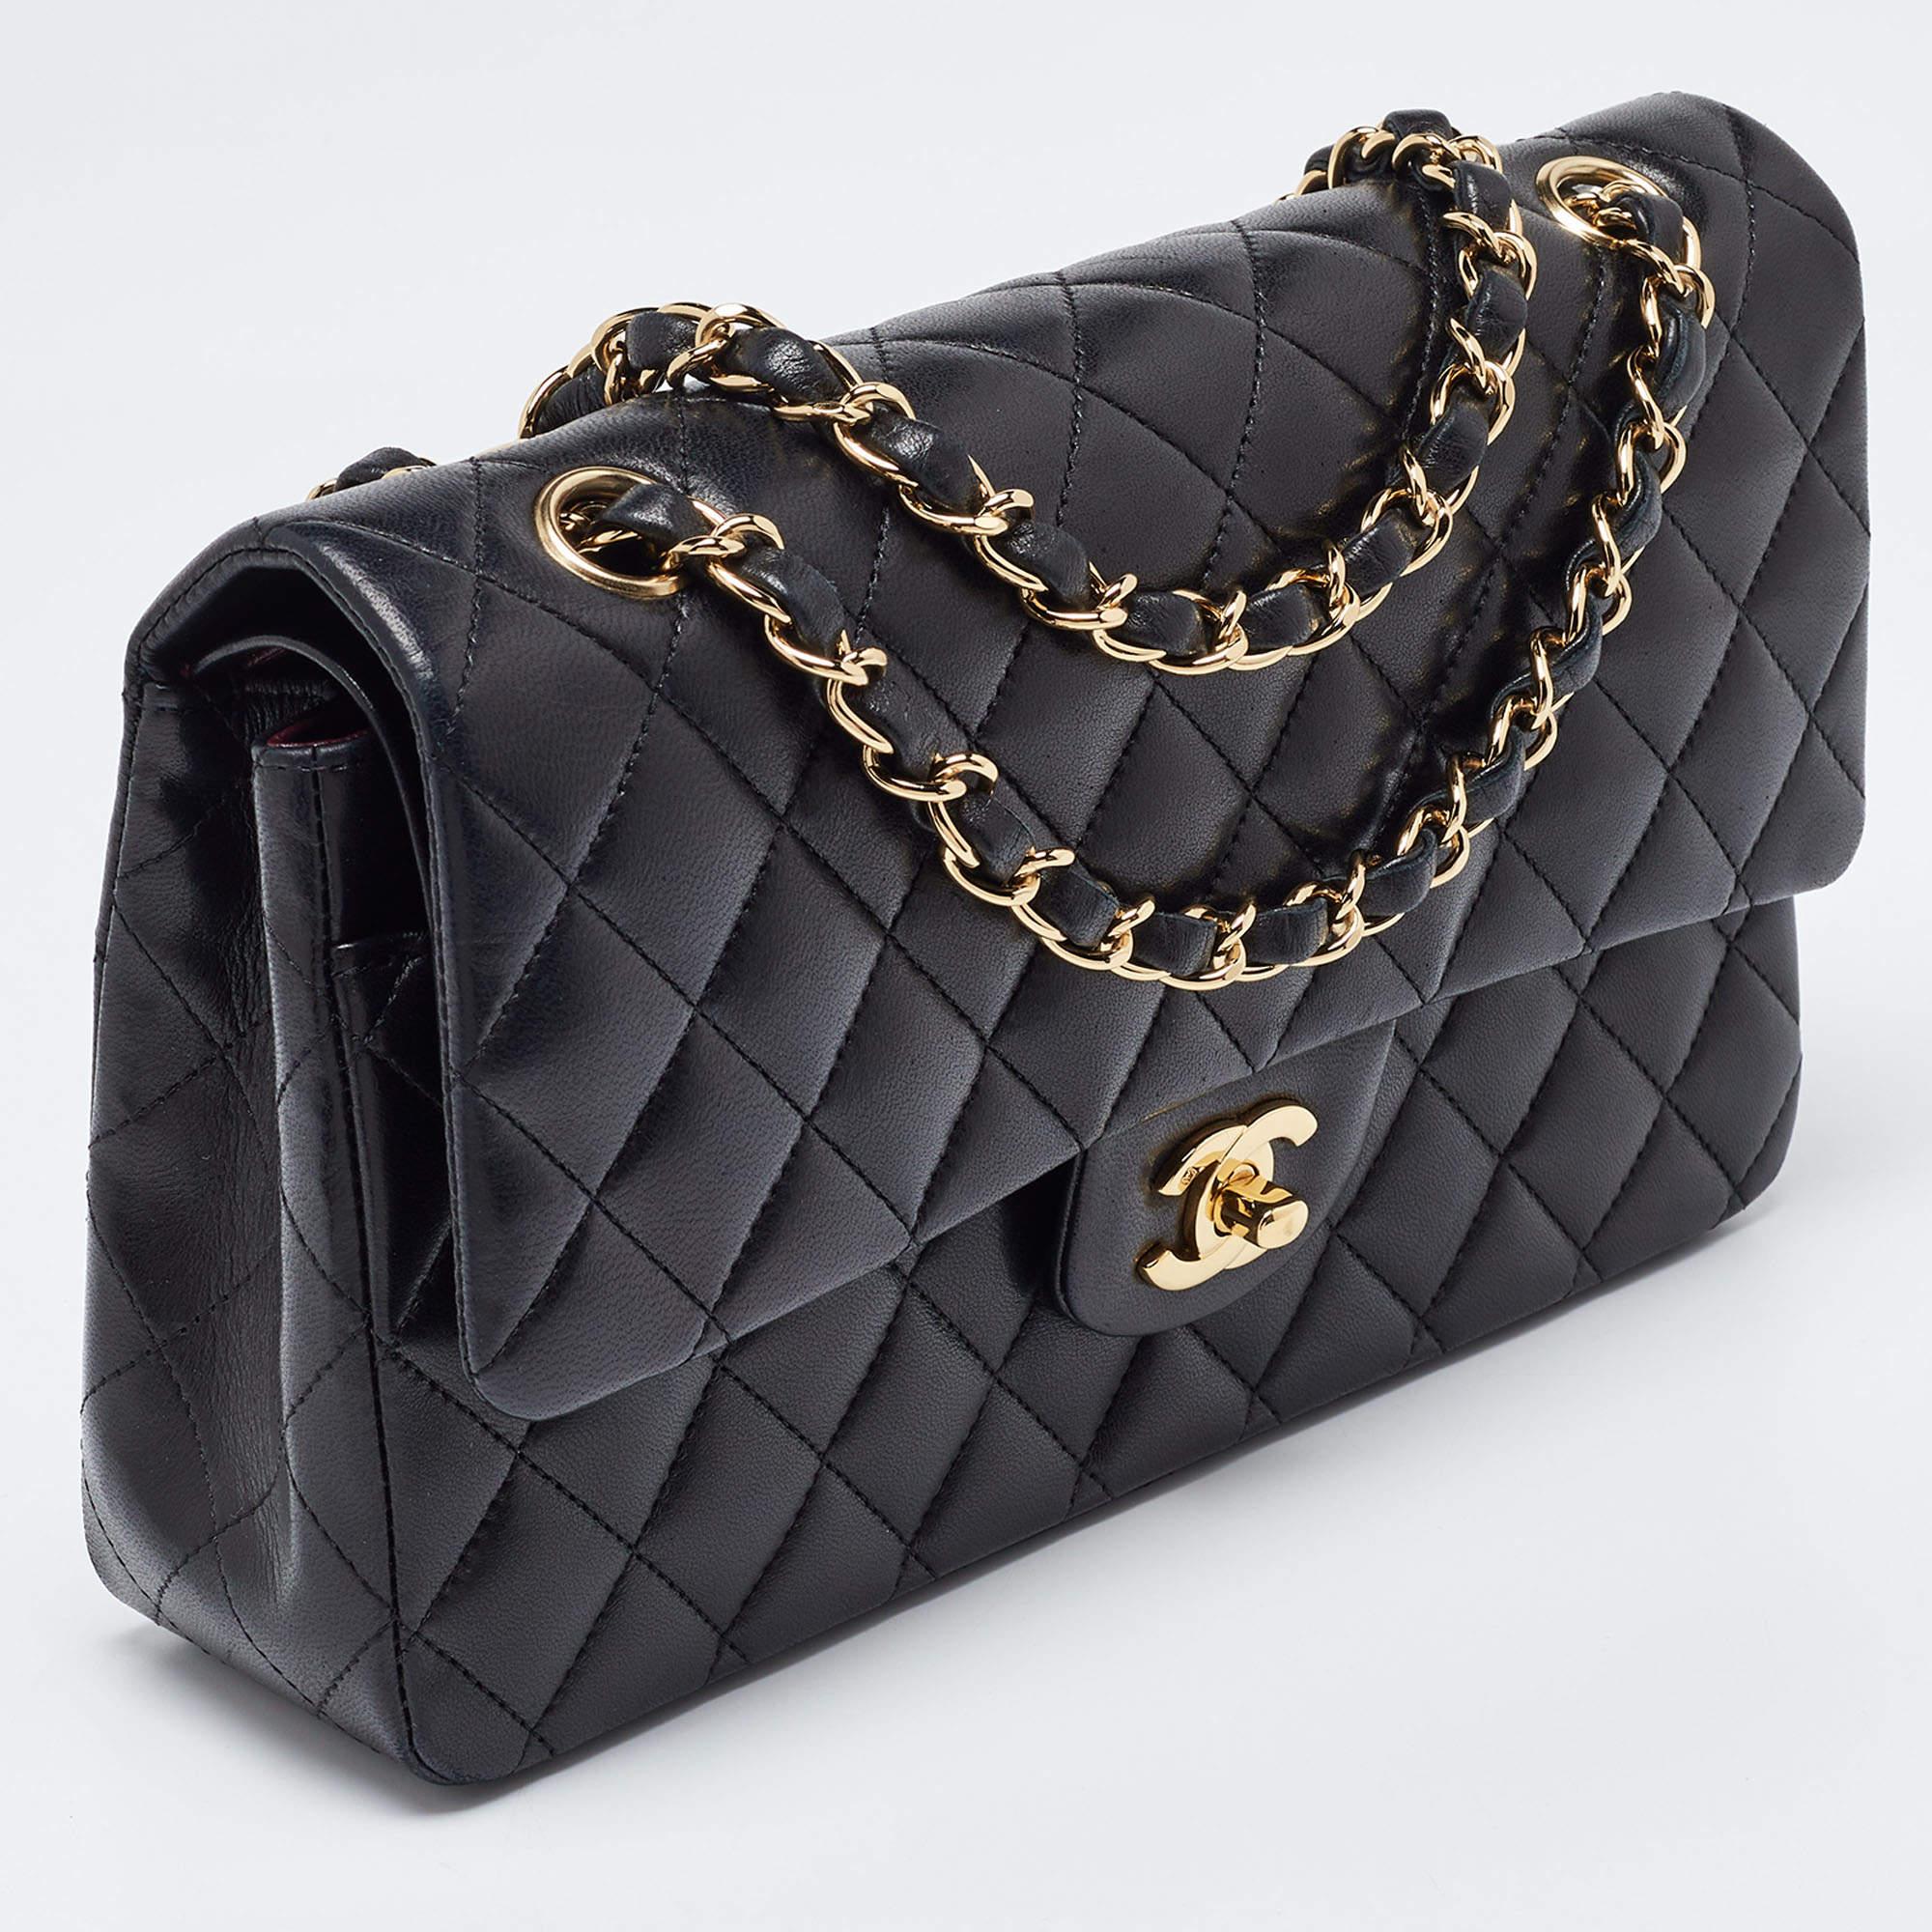 Women's Chanel Black Quilted Leather Medium Classic Double Flap Bag For Sale